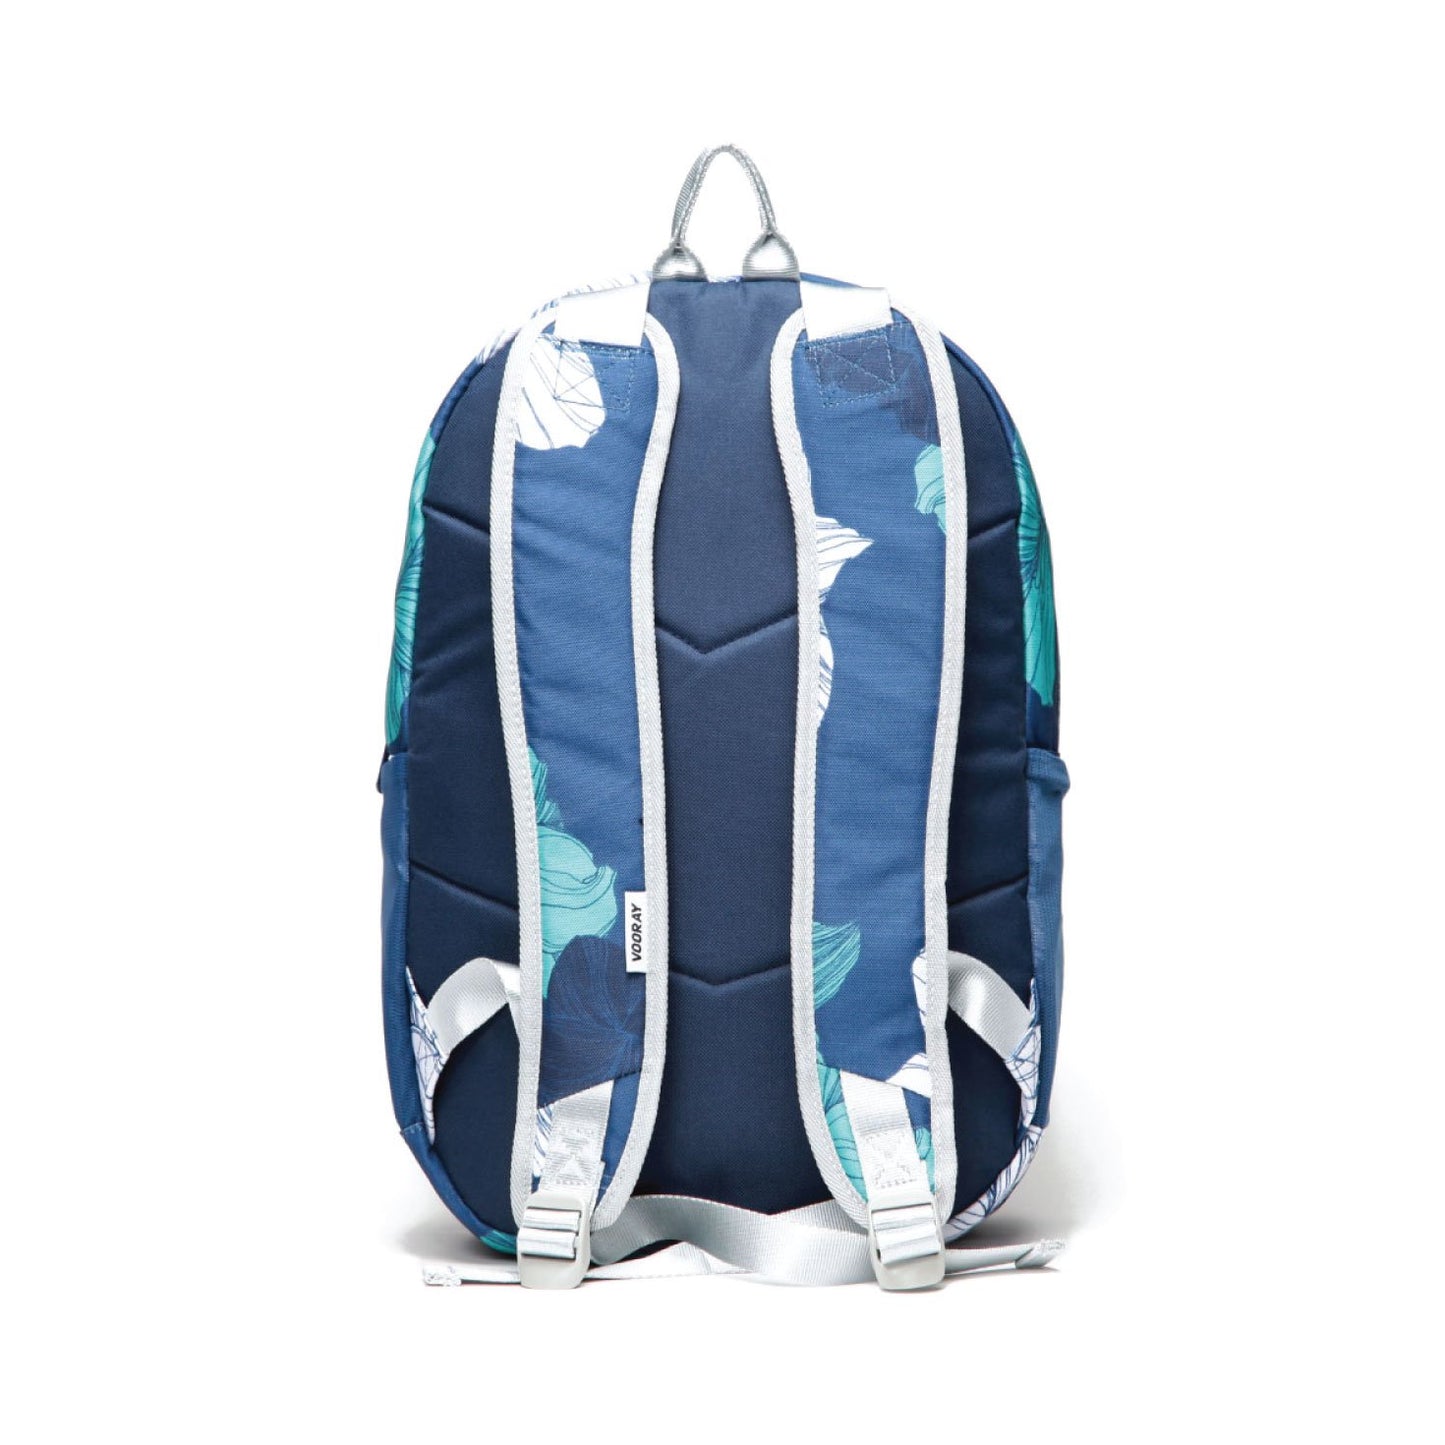 ACE Backpack - Blue Lily